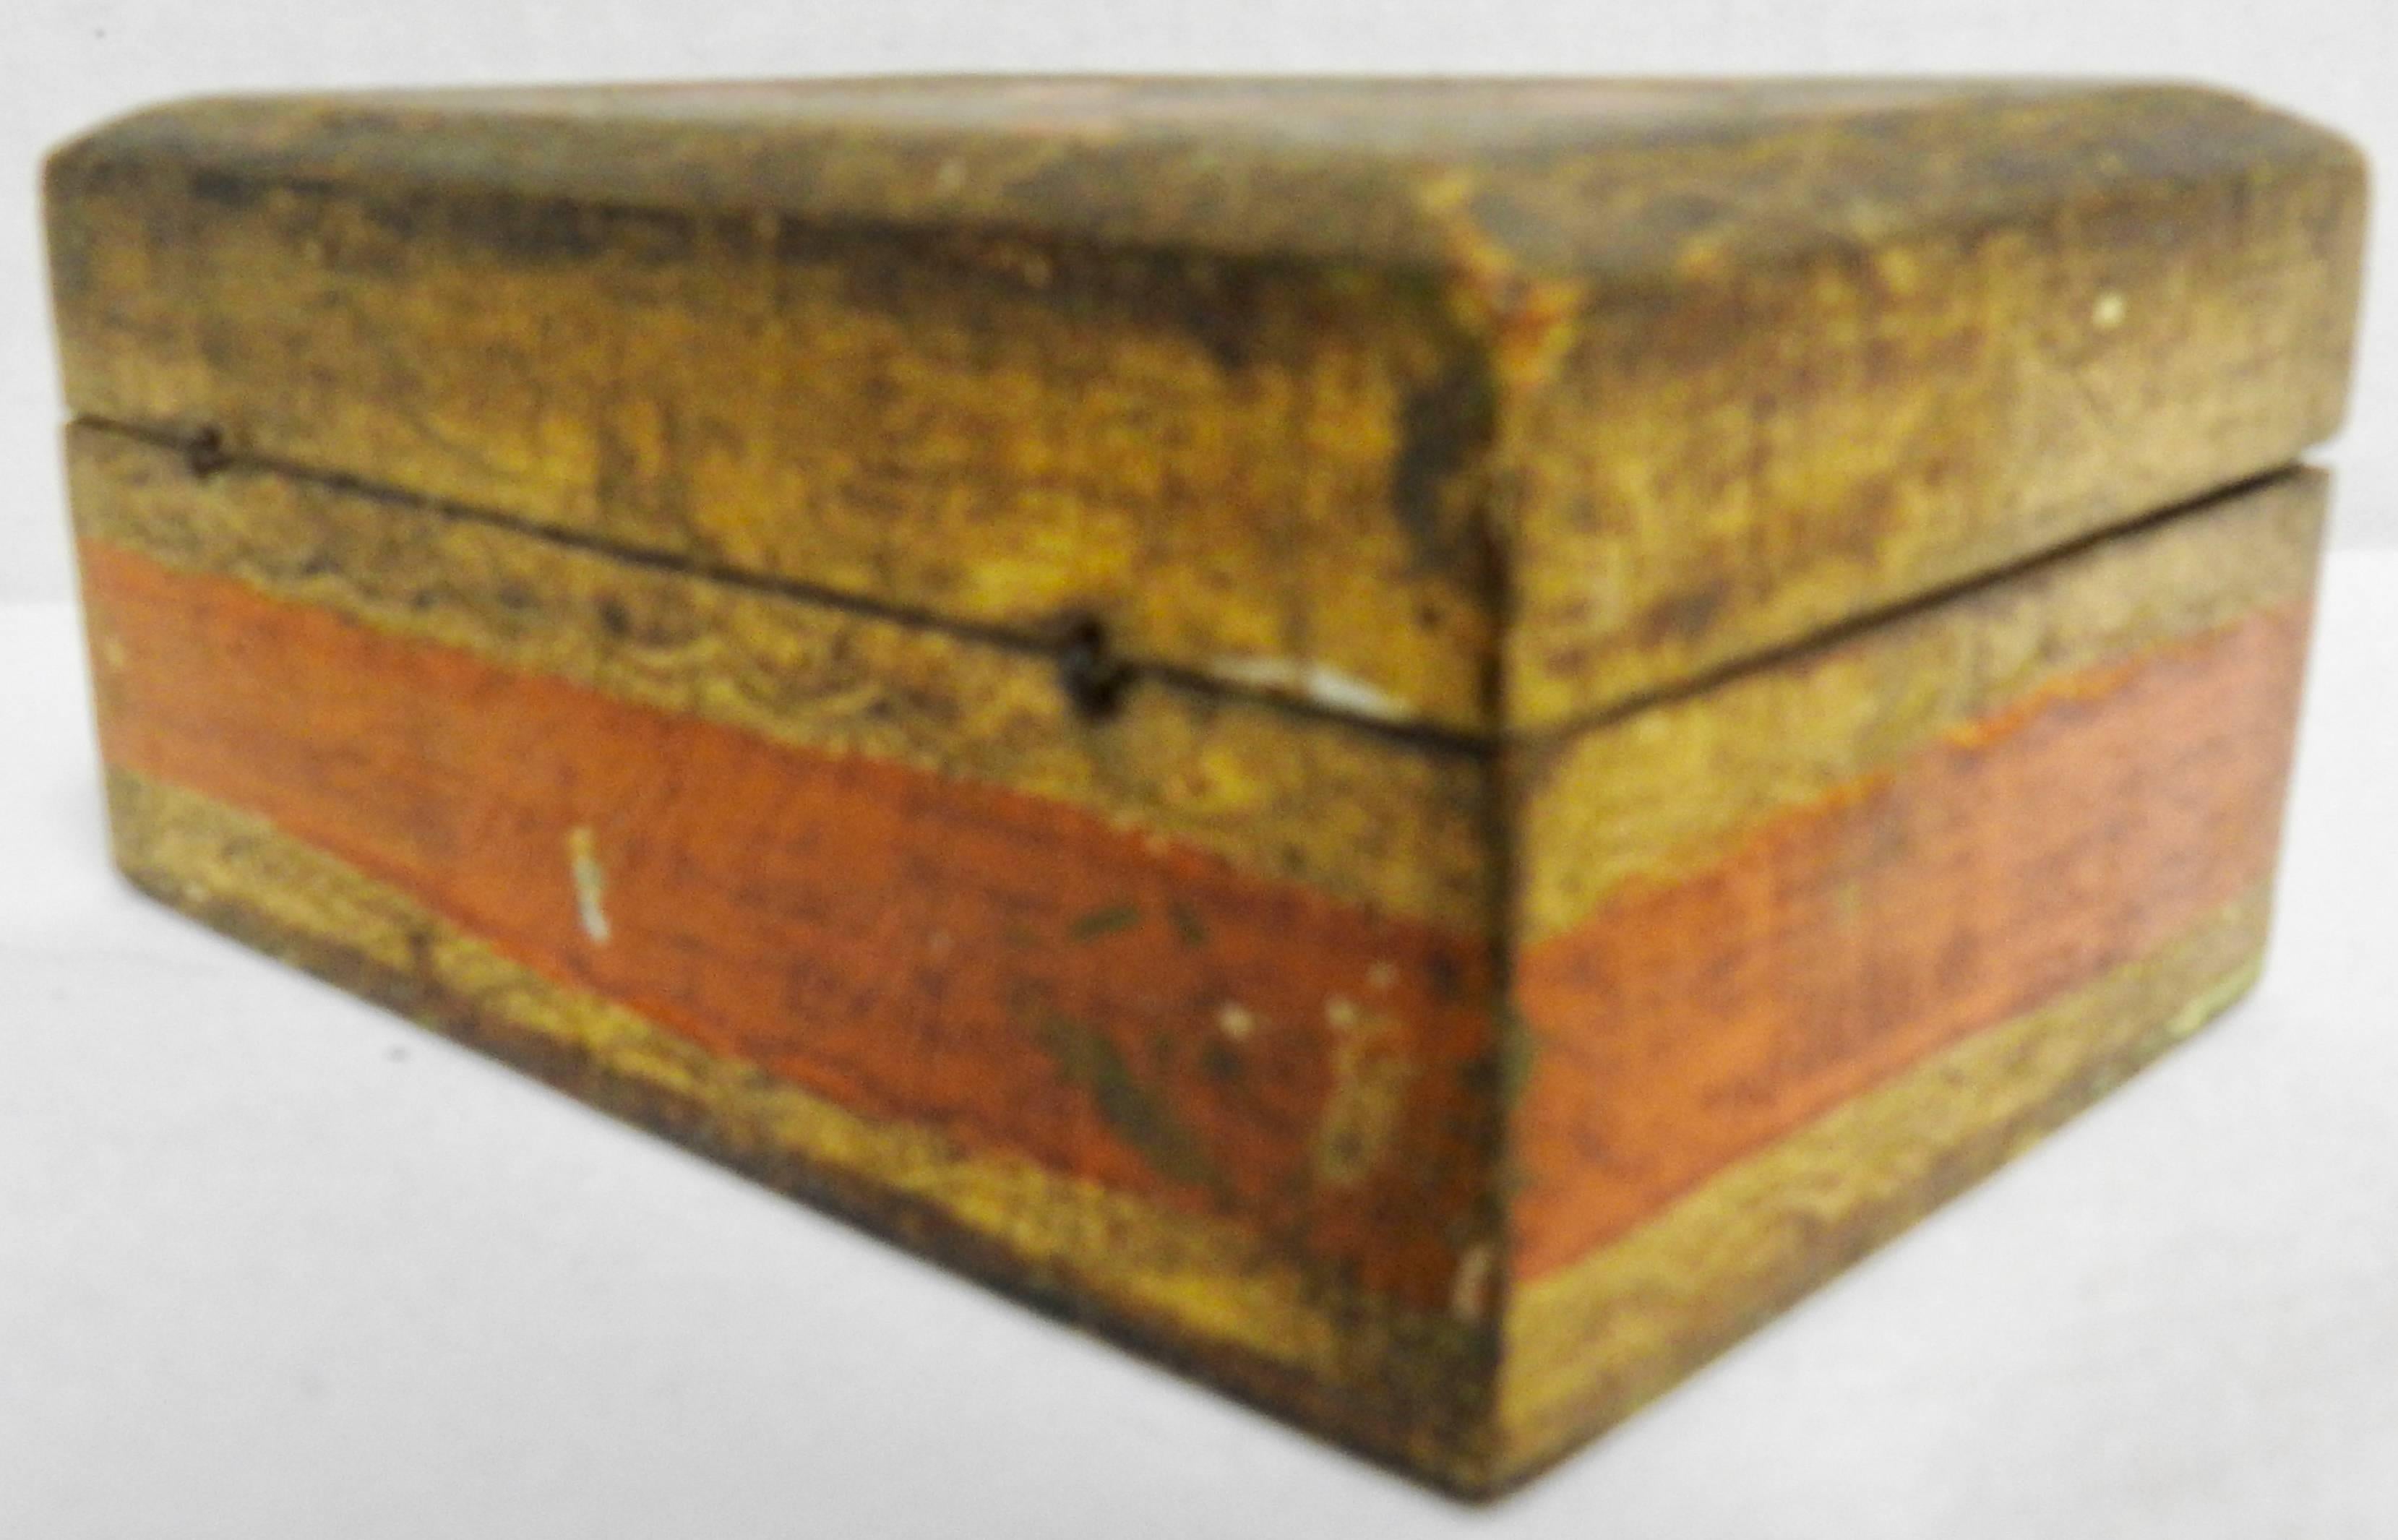 Featured is a small Florentine box from Italy, made during the mid-20th century. It is decorated with gilt along with detailed tangerine orange and a touch of emerald green. The inside is finished in a soft yellow. Tiny wires serve as the hinges.